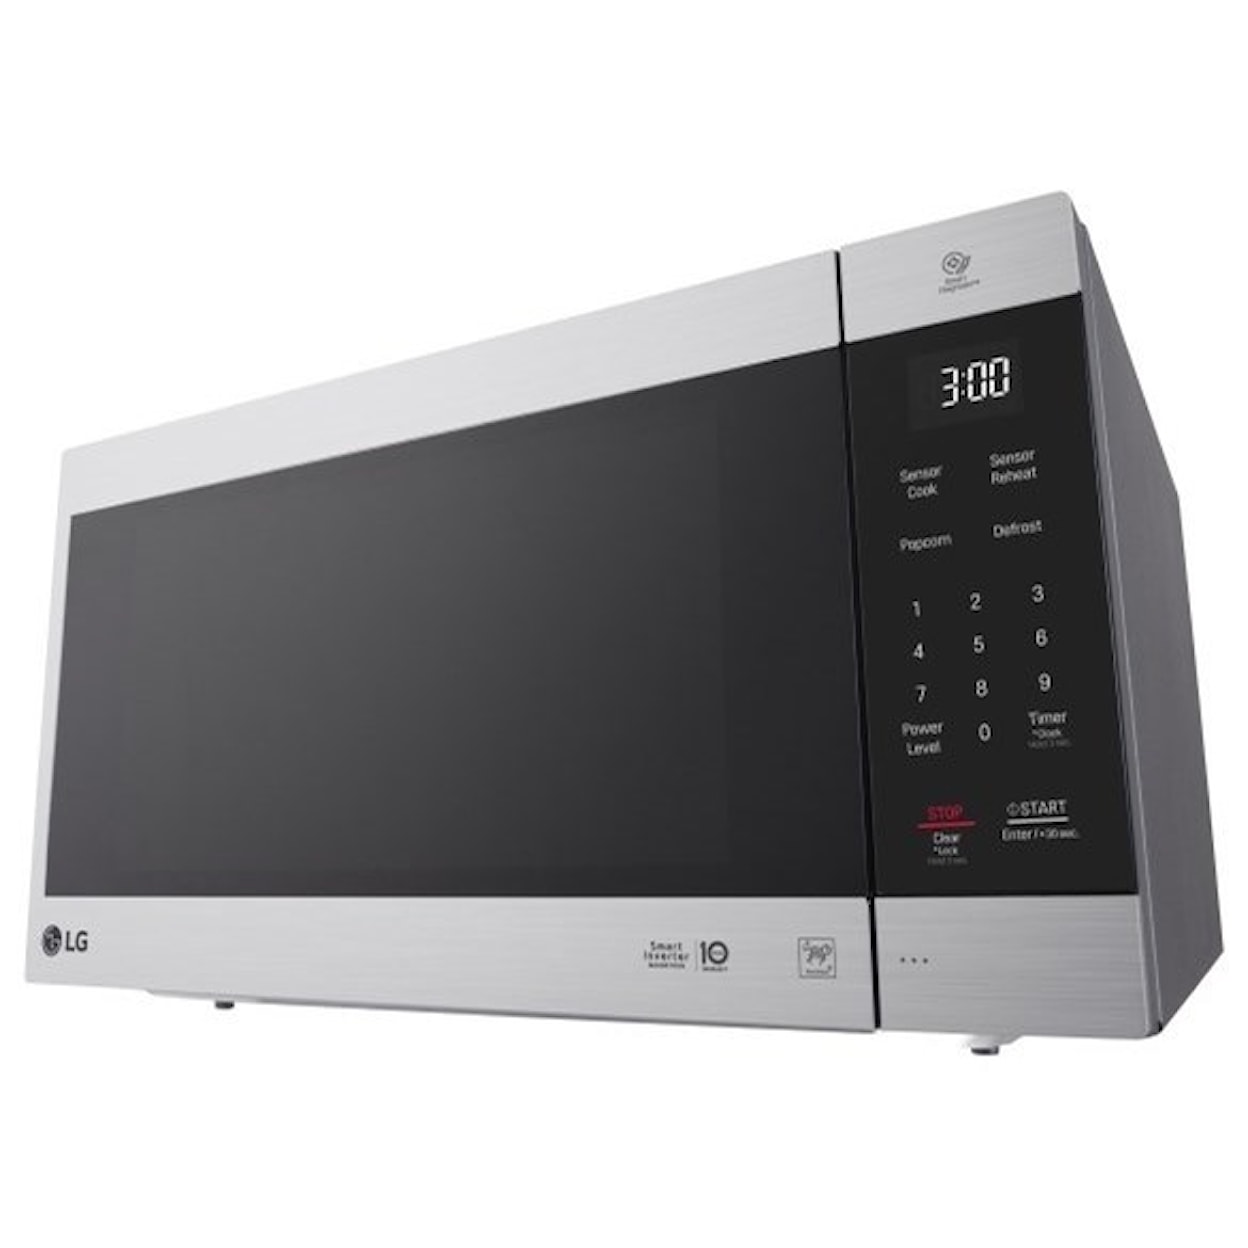 LG Appliances Microwaves 2.0 cu. ft. NeoChef™ Countertop Microwave wi